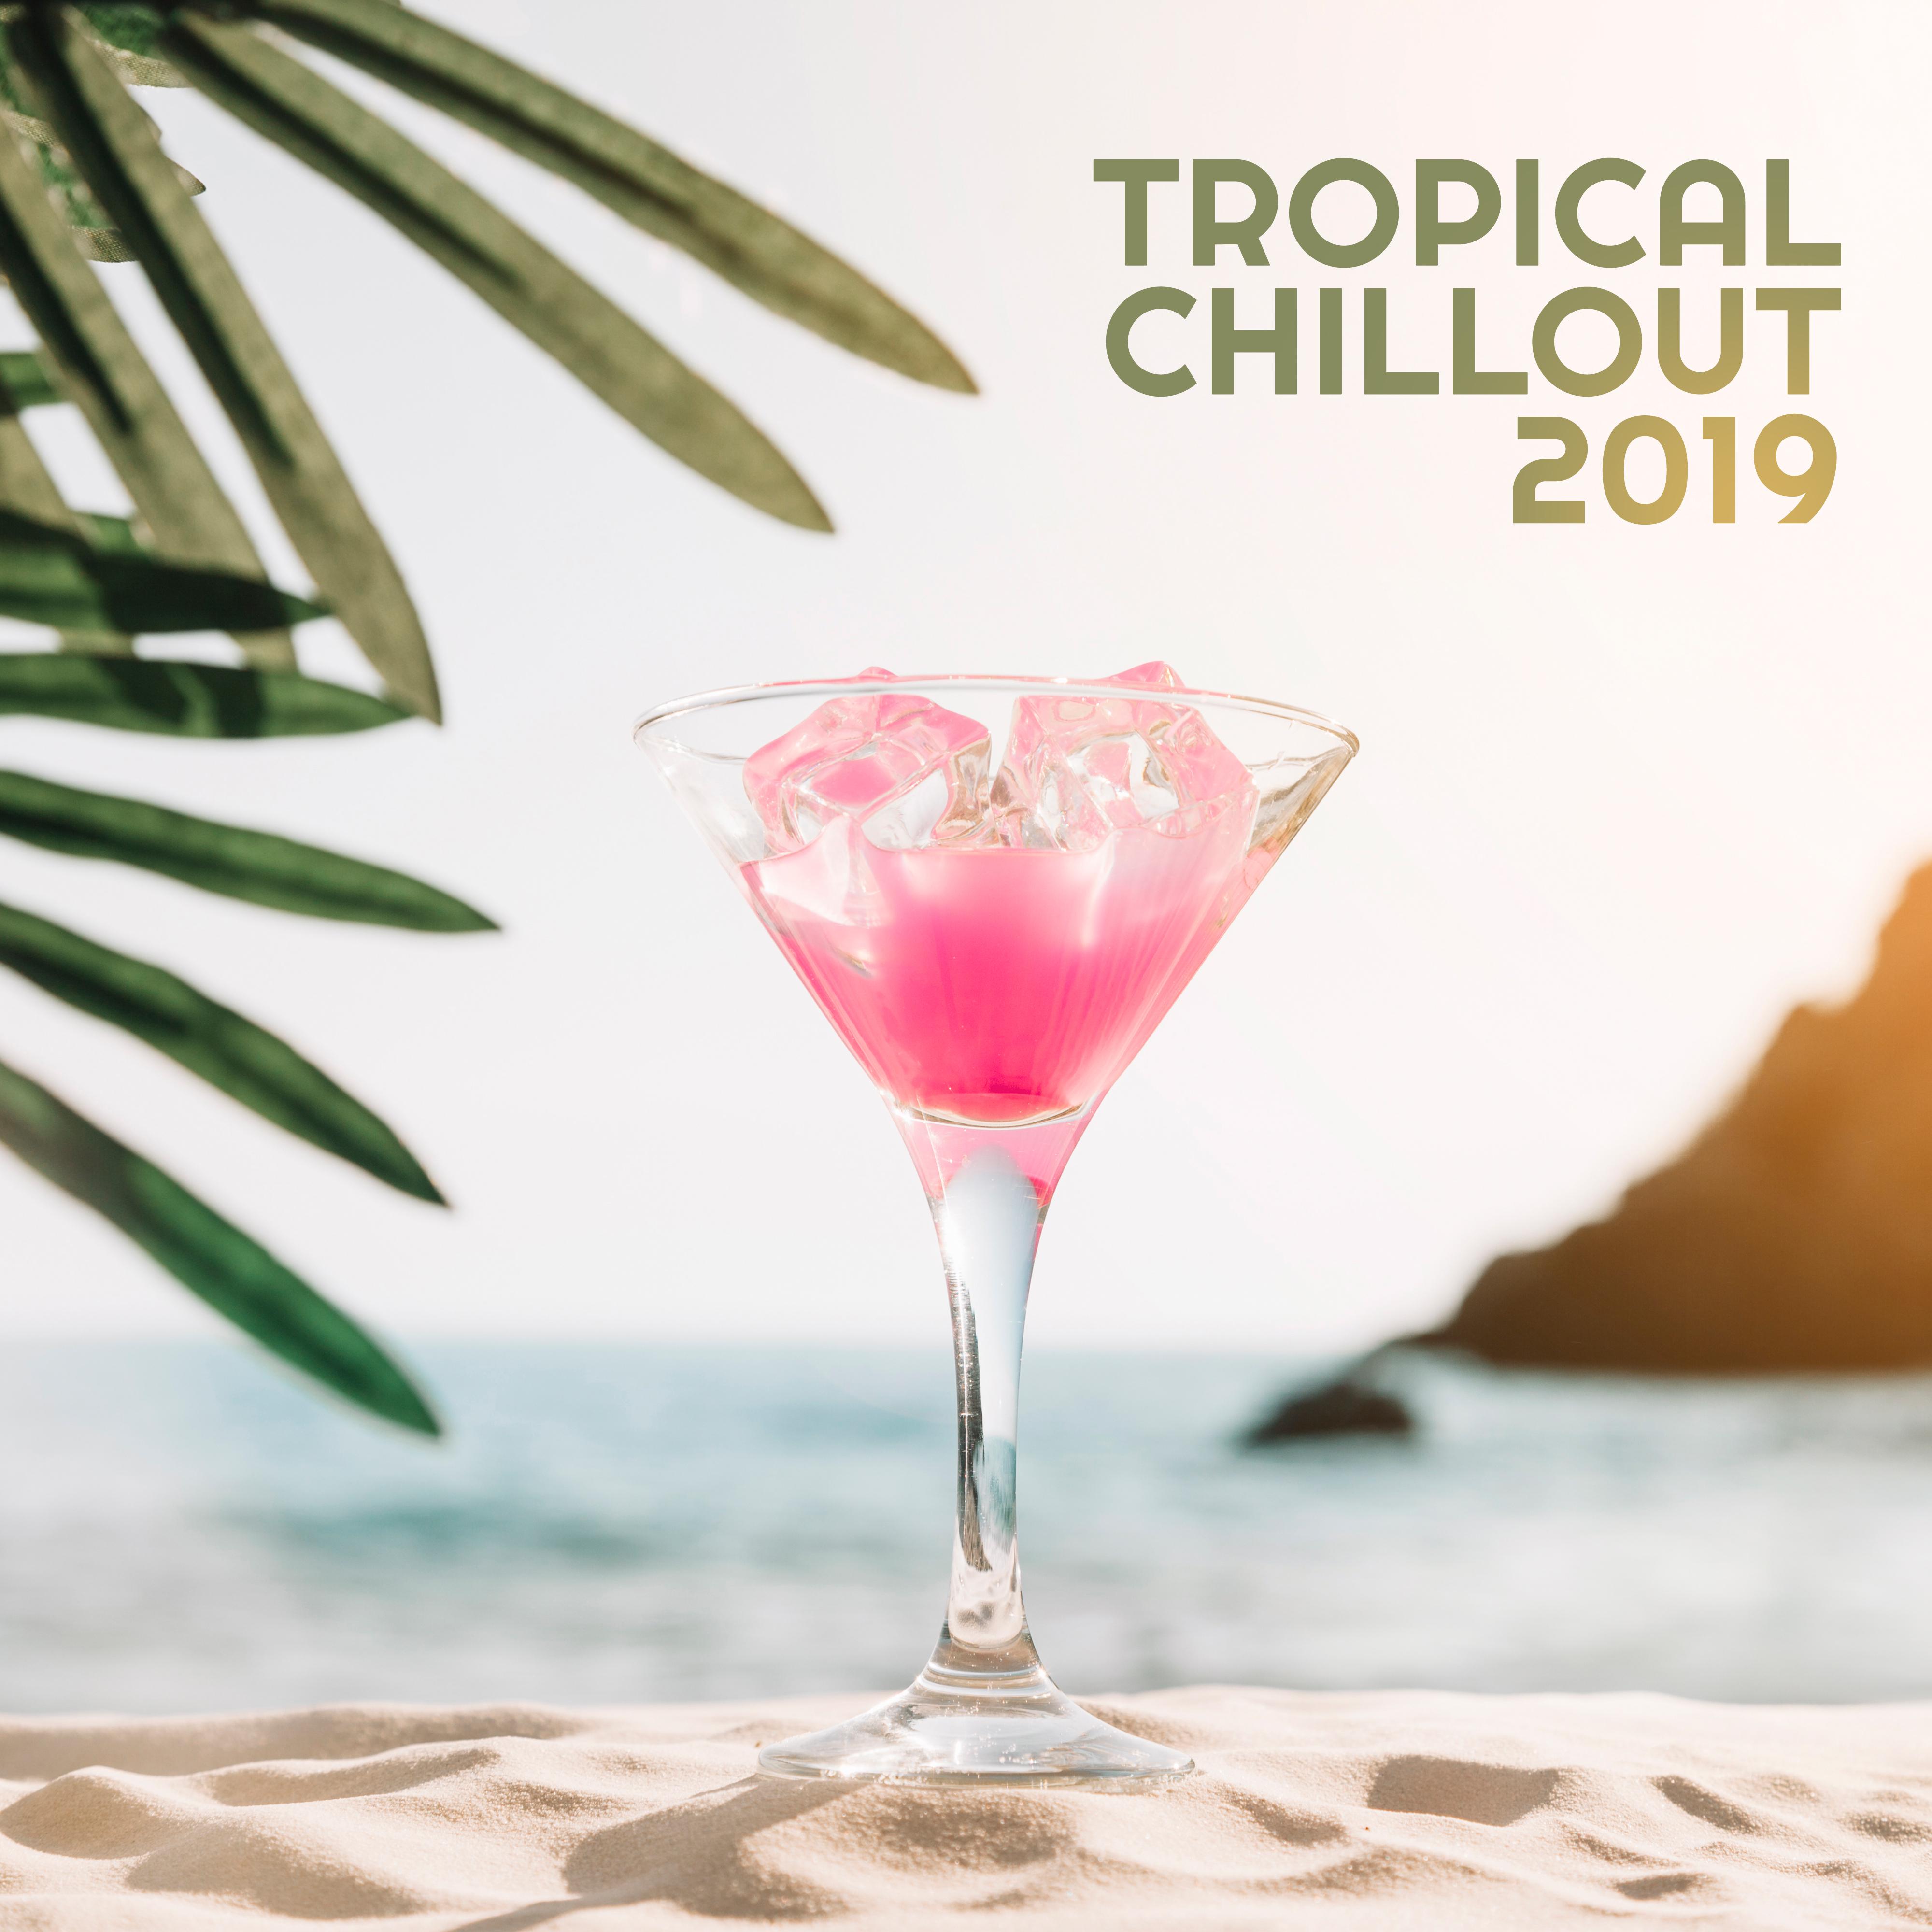 Tropical Chillout 2019  Summer Electronic Vibes, Rest Under the Palms, Calming On the Beach